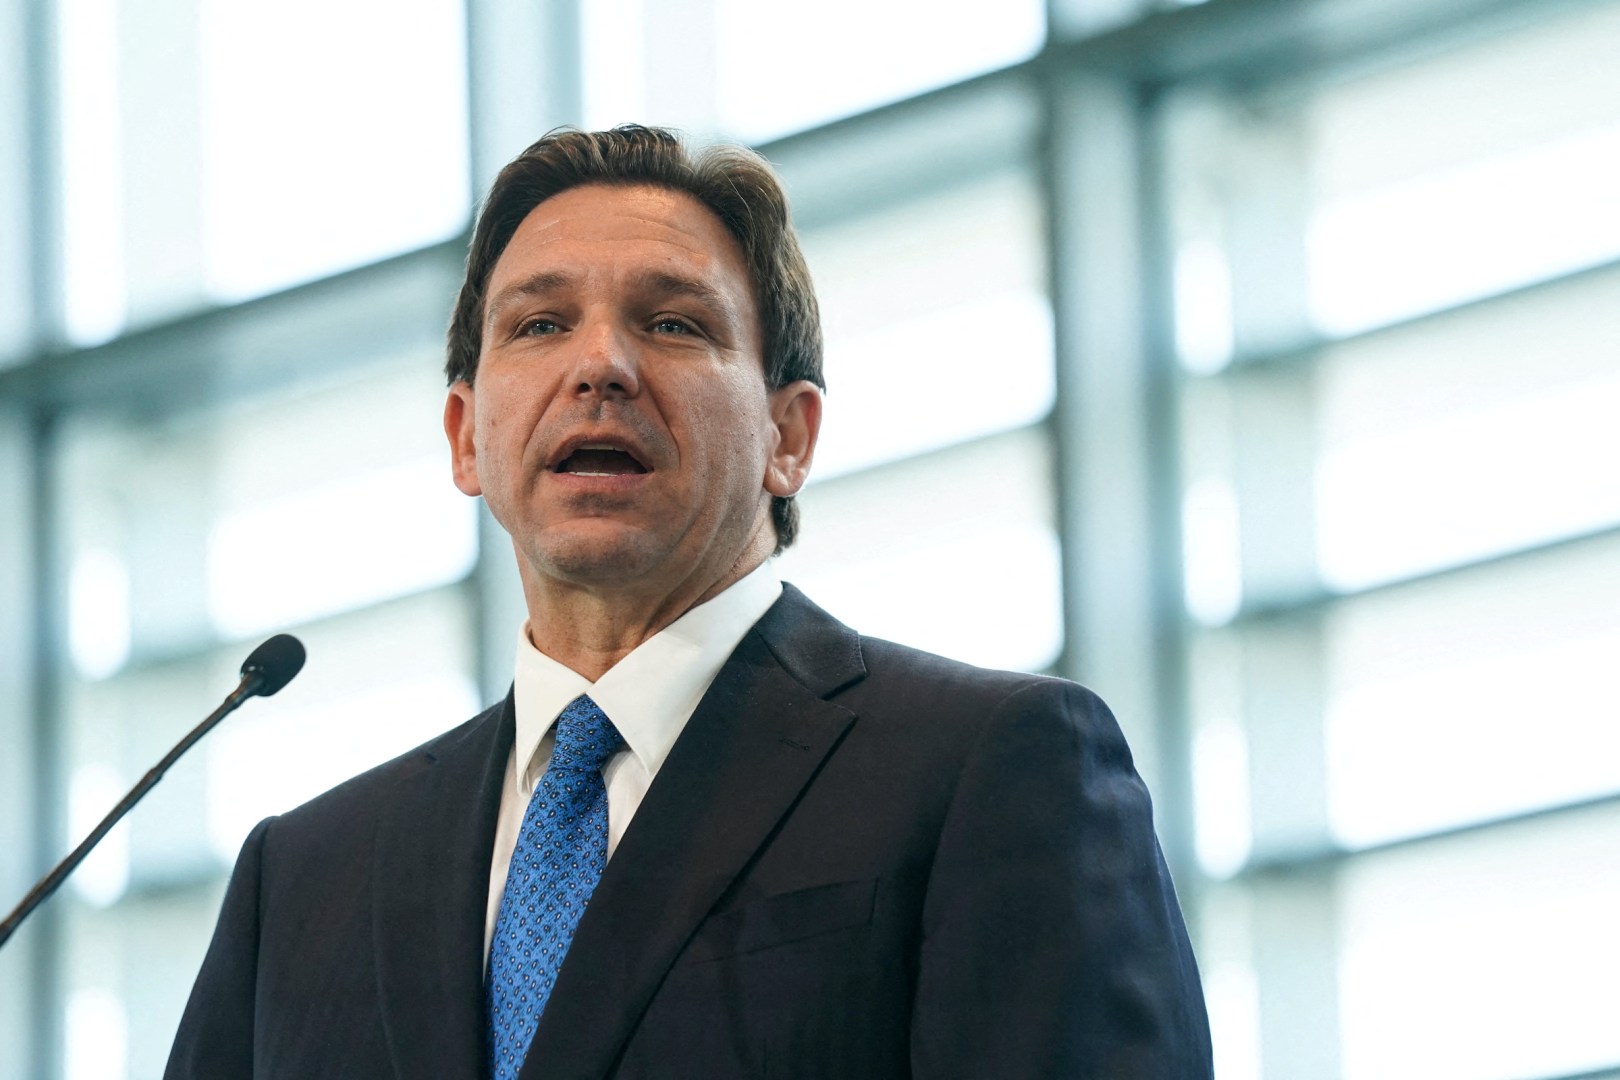 Florida legislators changed state law to allow Ron DeSantis to run for president, but his campaign may be over before it officially begins.